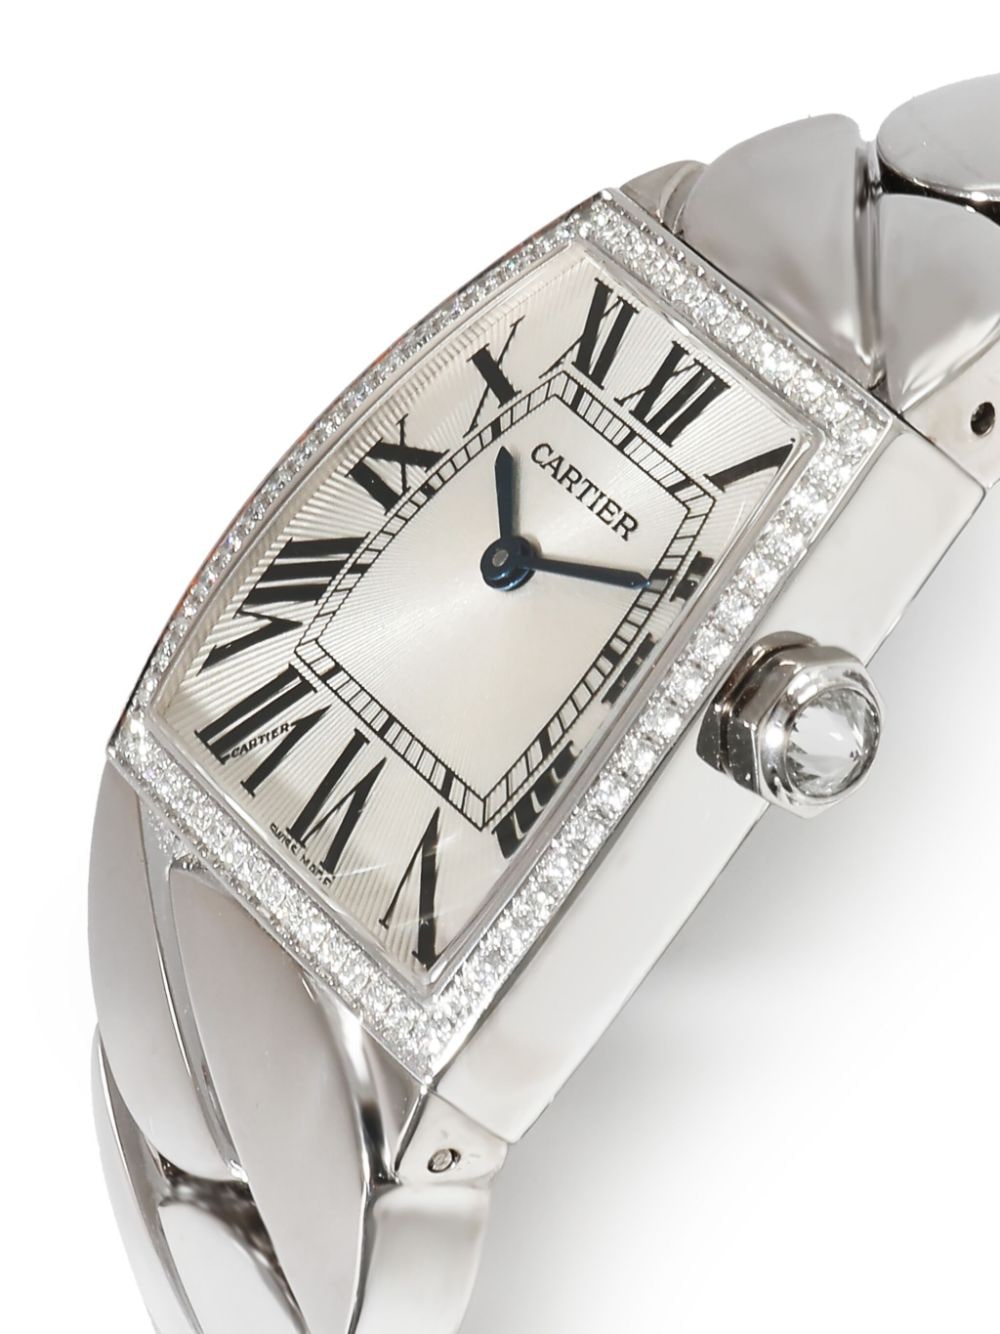 Pre-owned Cartier La Dona 23毫米腕表 （2000-2009年典藏款 ） In Silver